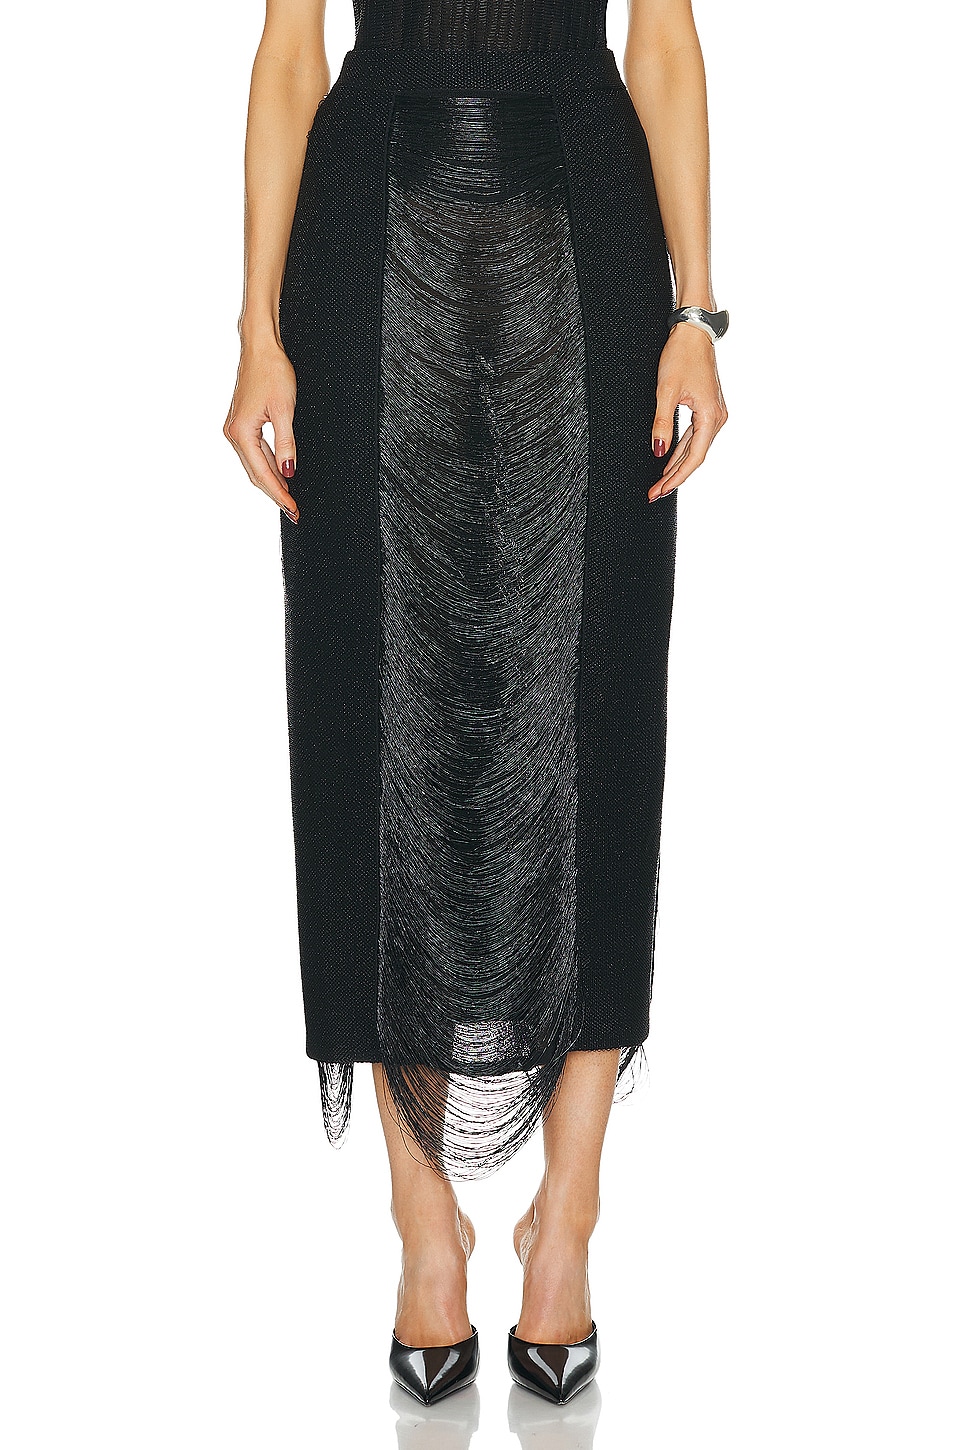 Image 1 of Alexander McQueen Armour Stitch Skirt in Black